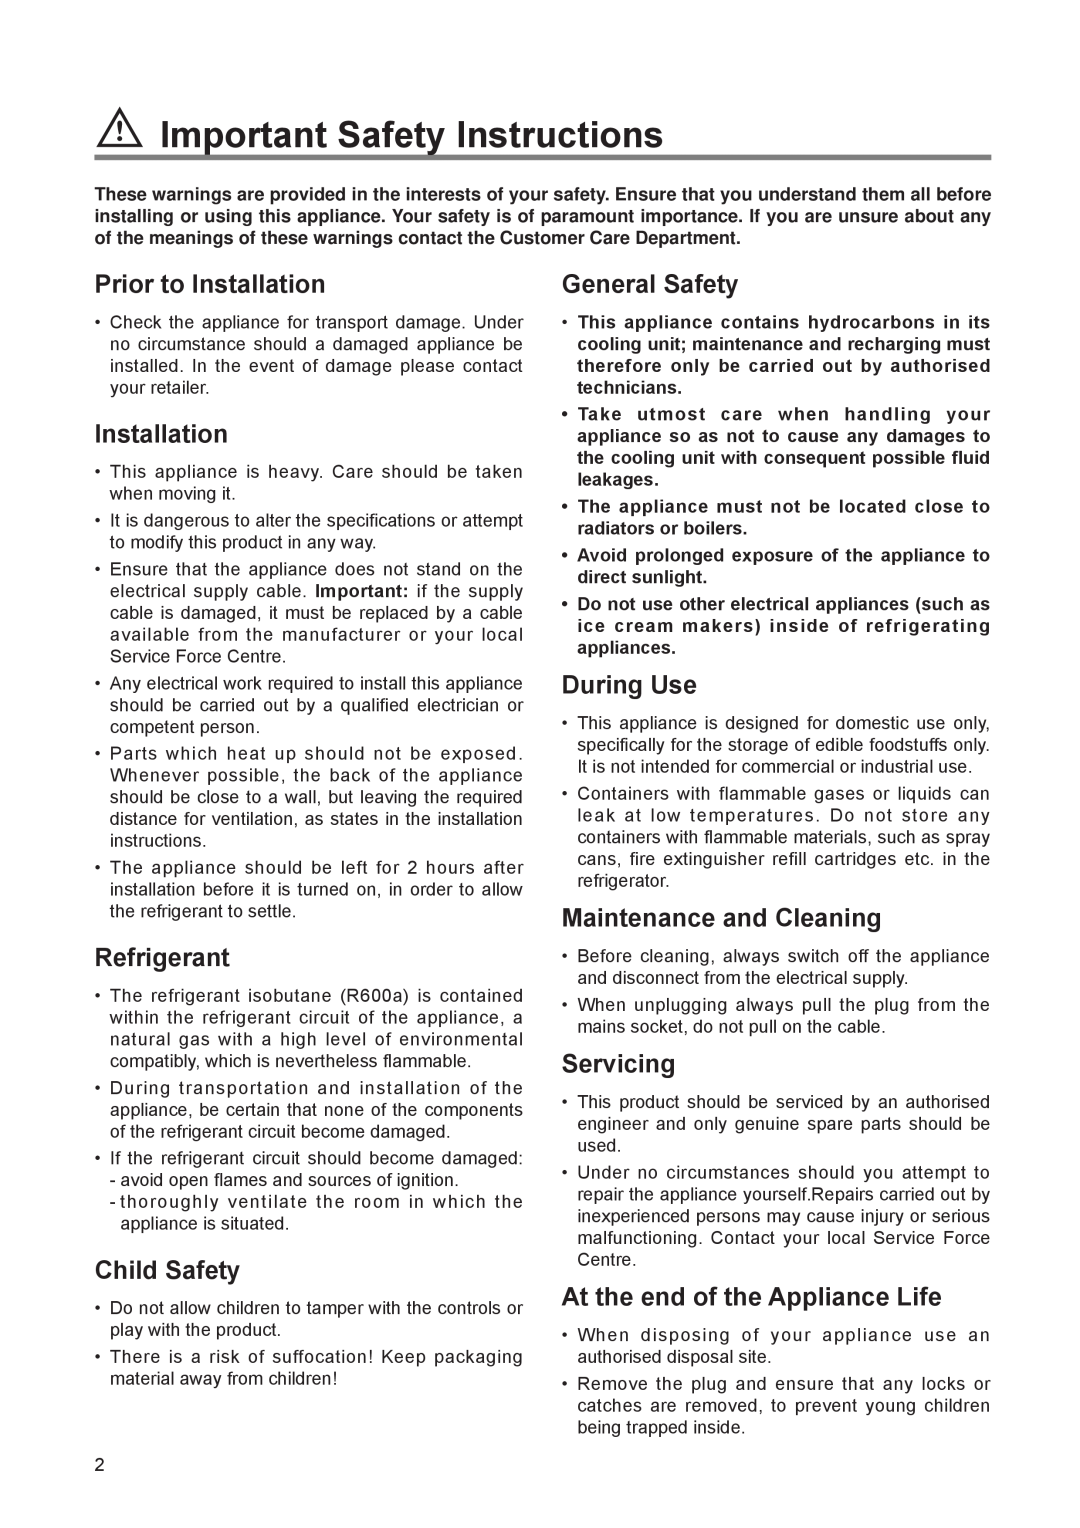 Zanussi ZL 66 SI manual Important Safety Instructions, Prior to Installation, Refrigerant, Child Safety, General Safety 